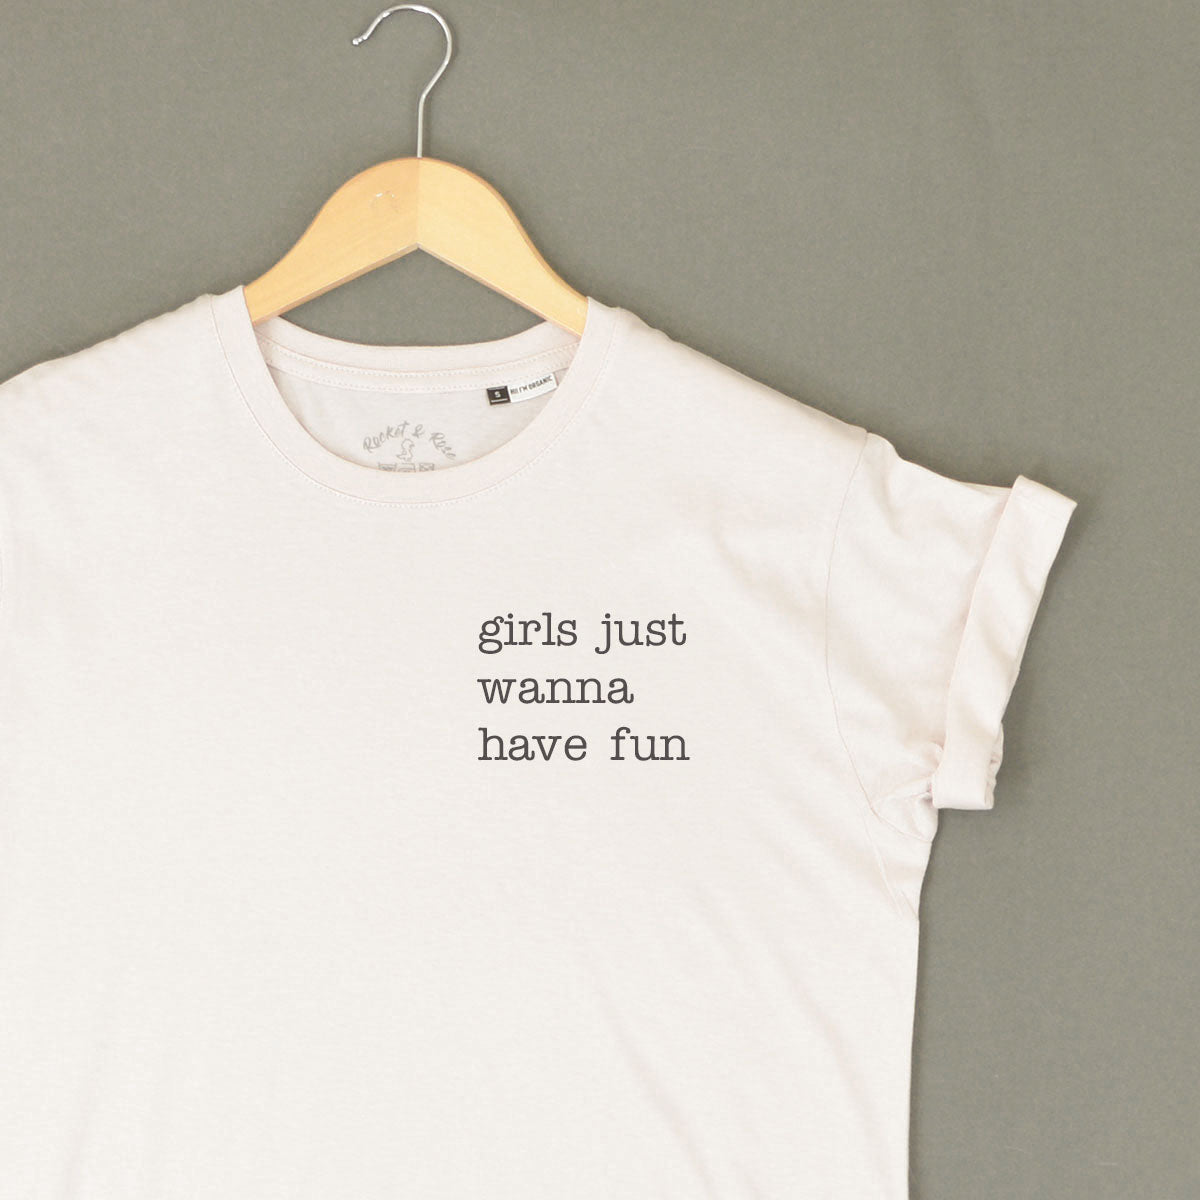 donna clauson recommends girls just wanna have fun tumblr pic